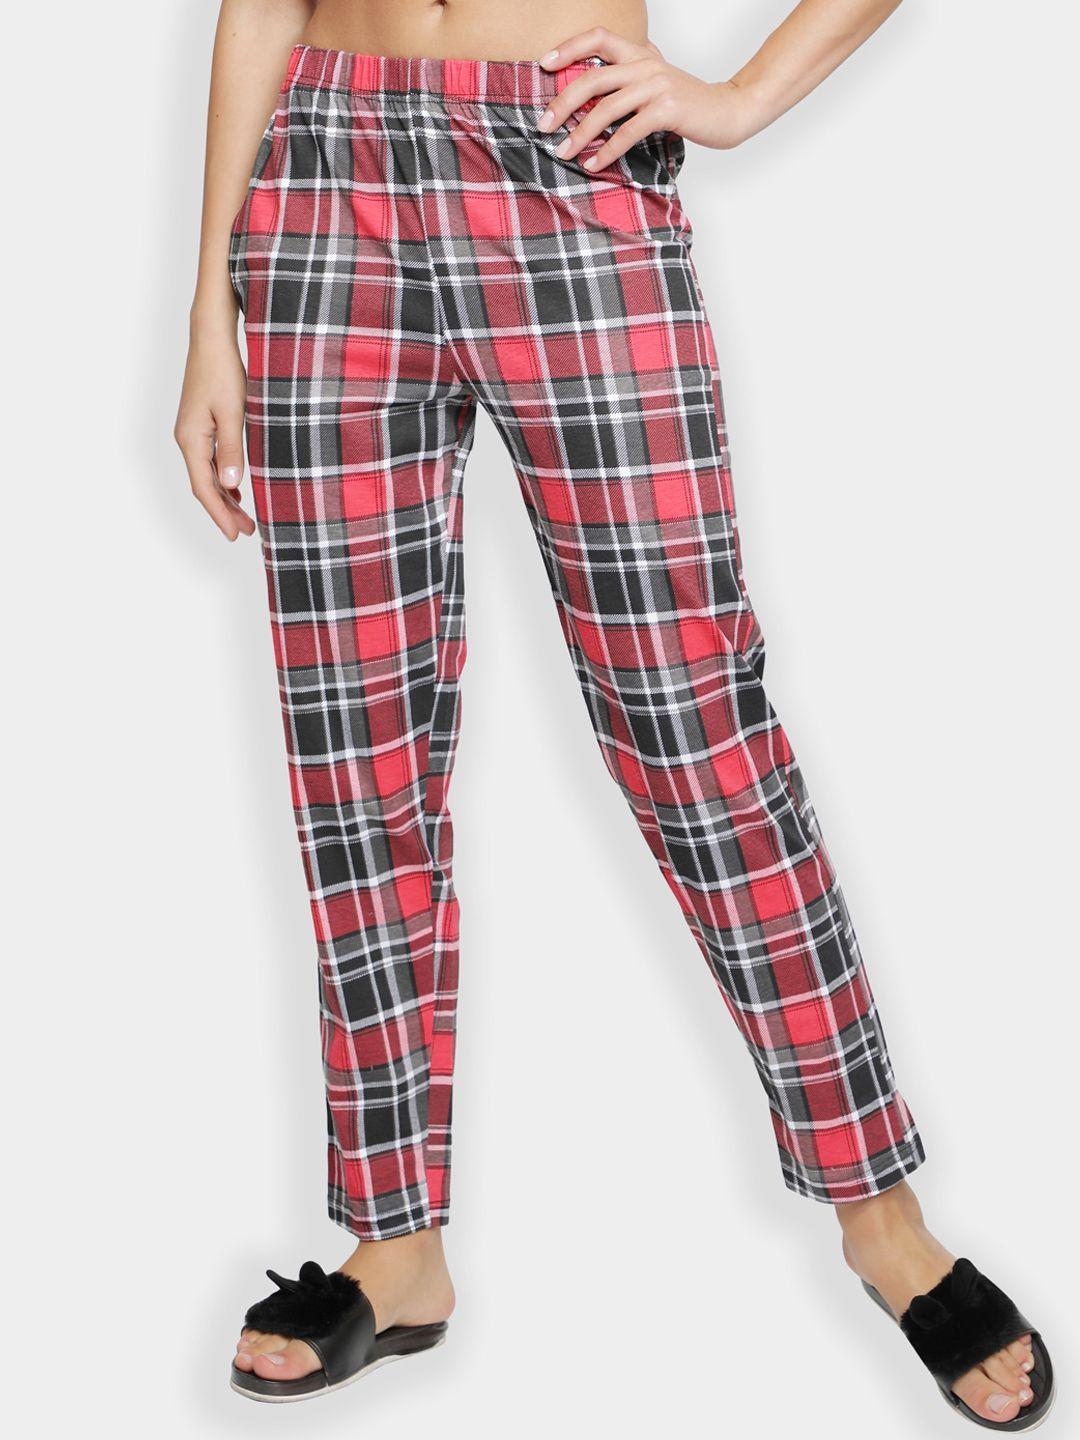 bstories women red & black checked printed cotton lounge pants